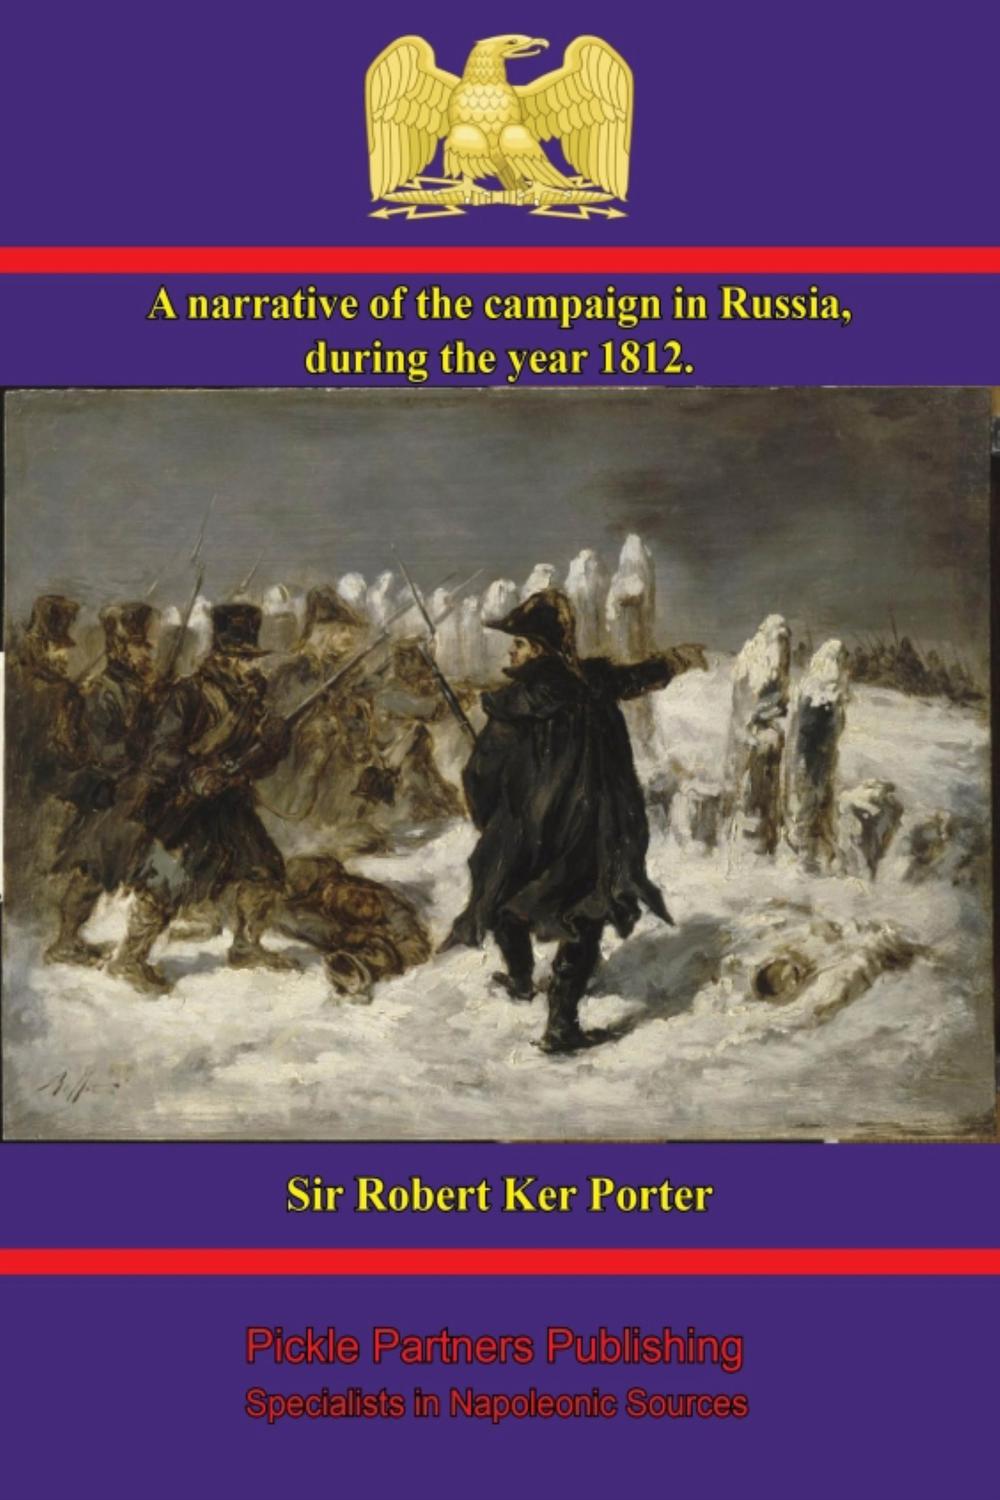 A narrative of the campaign in Russia, during the year 1812 - Sir Rober Ker Porter,,